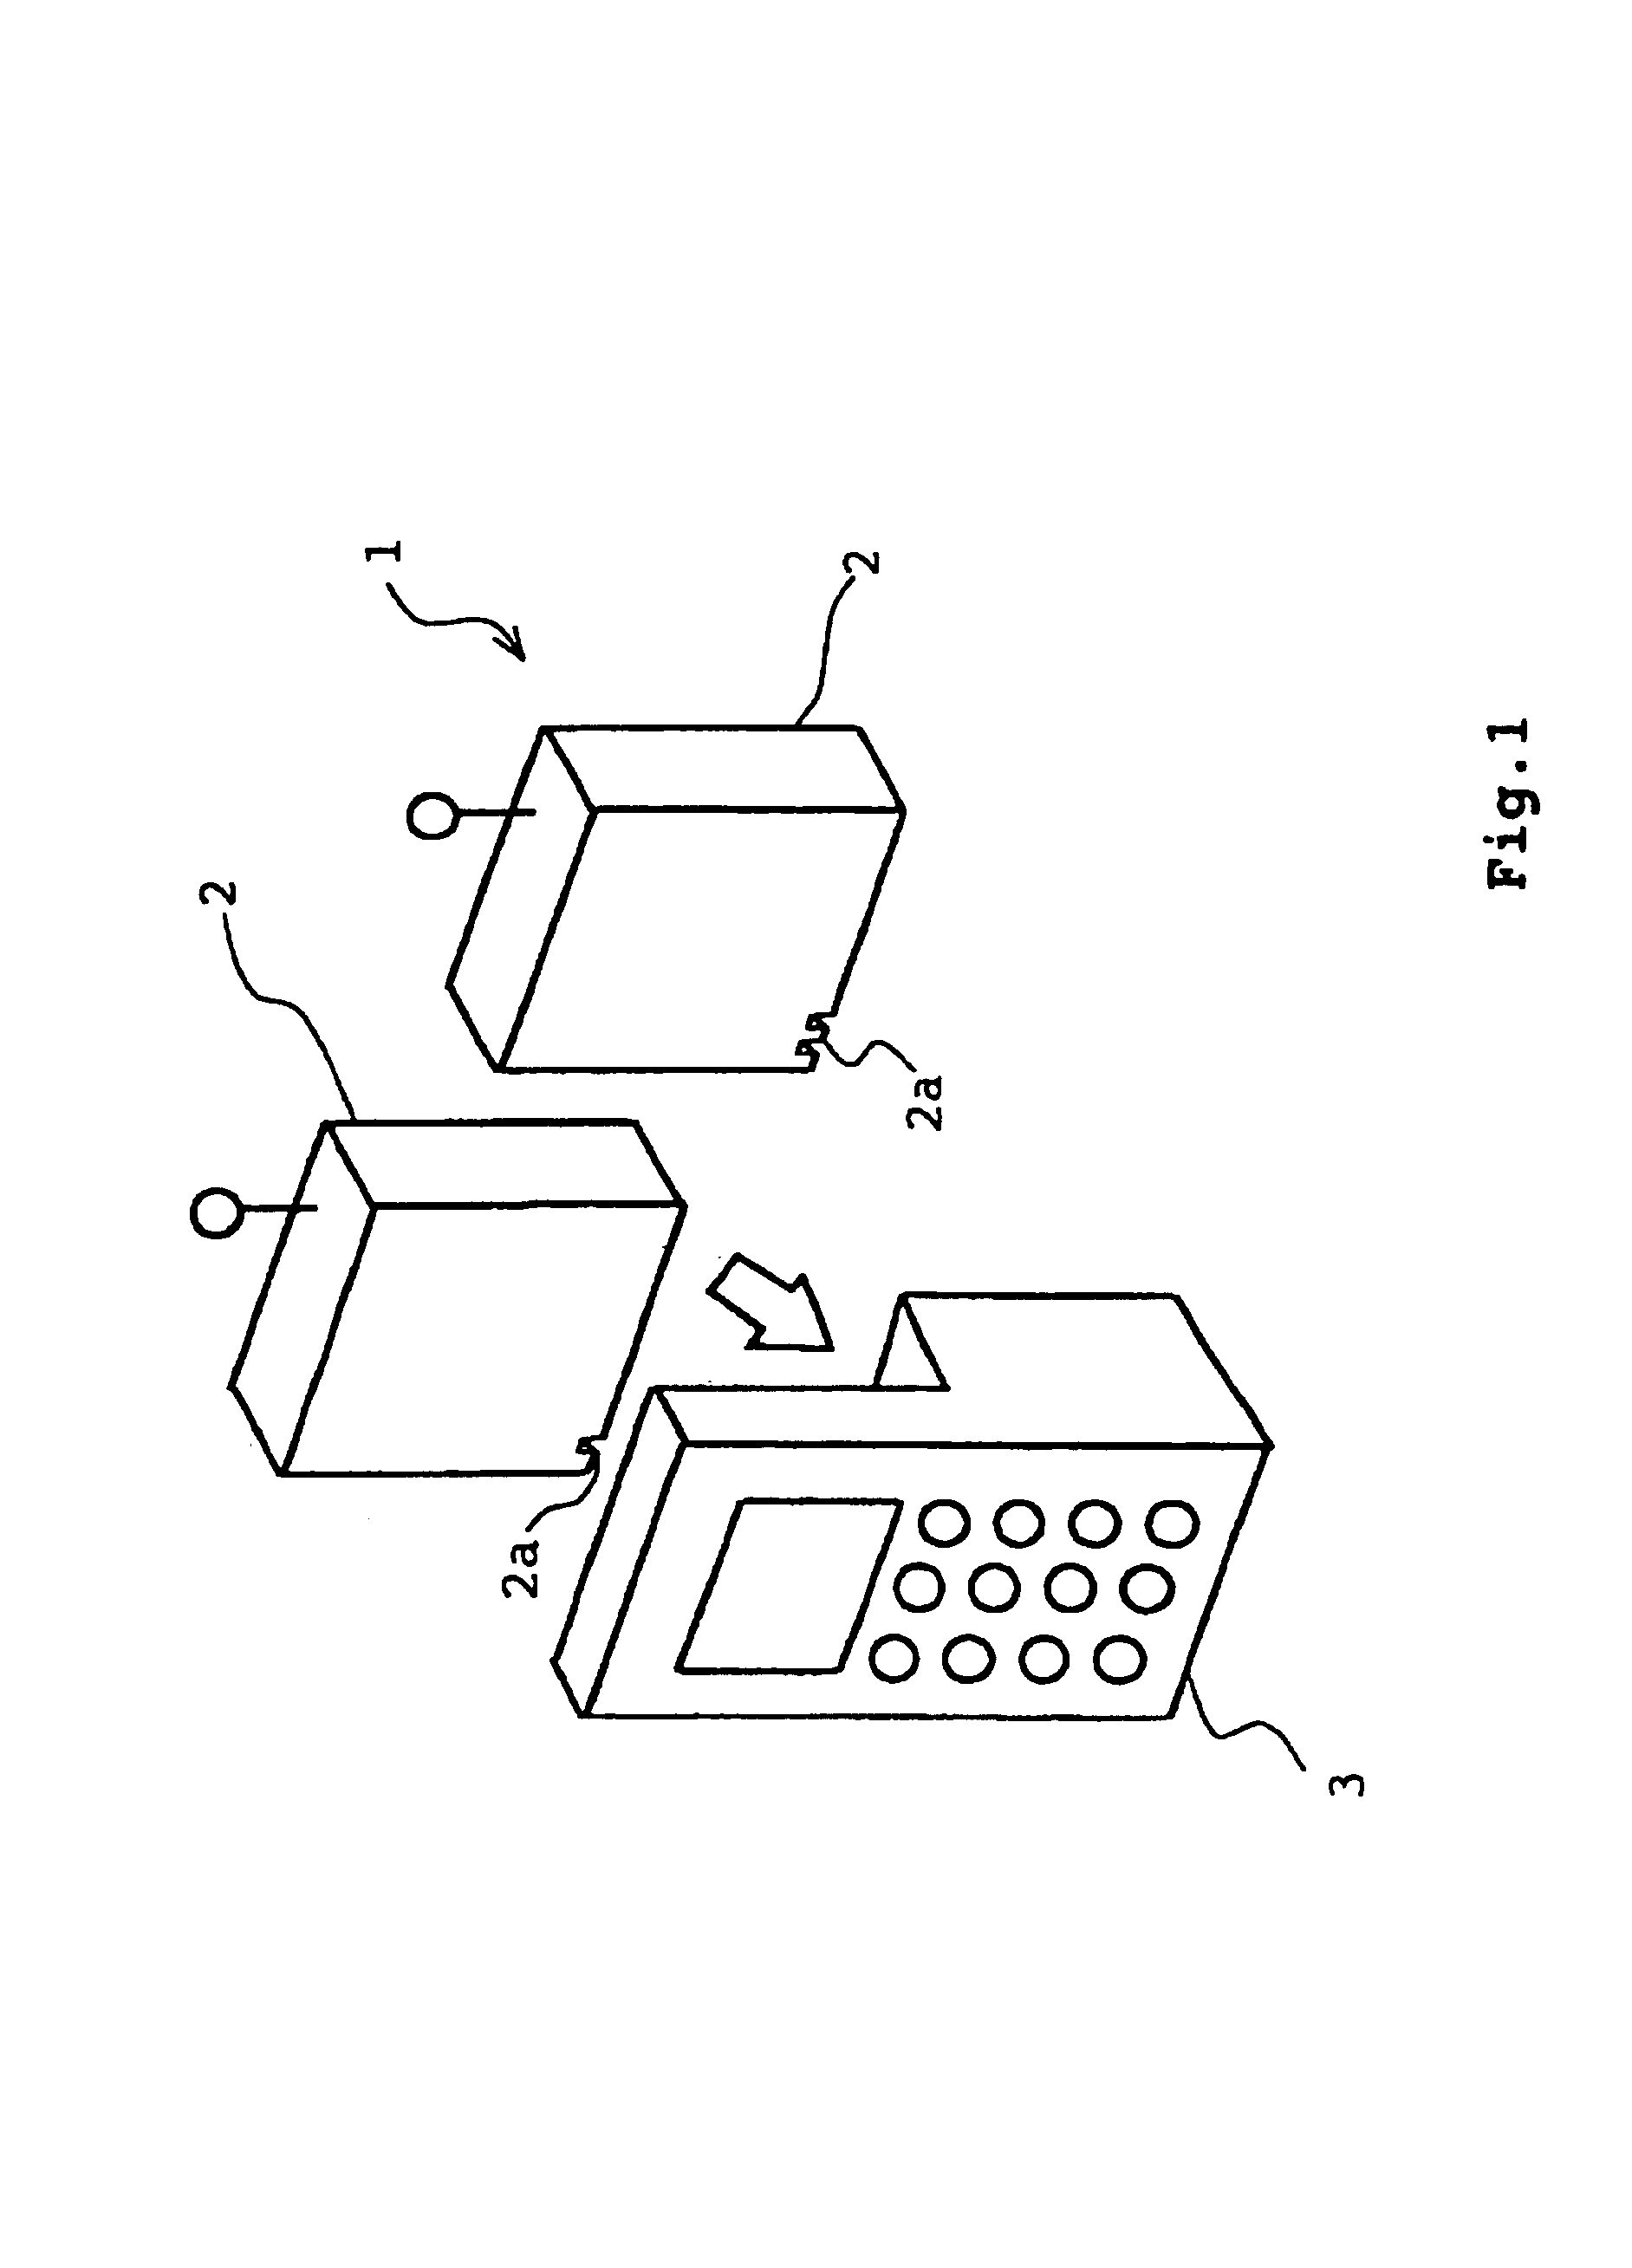 Portable communication device for domestic and international communications and automatic calling method for domestic and international calls